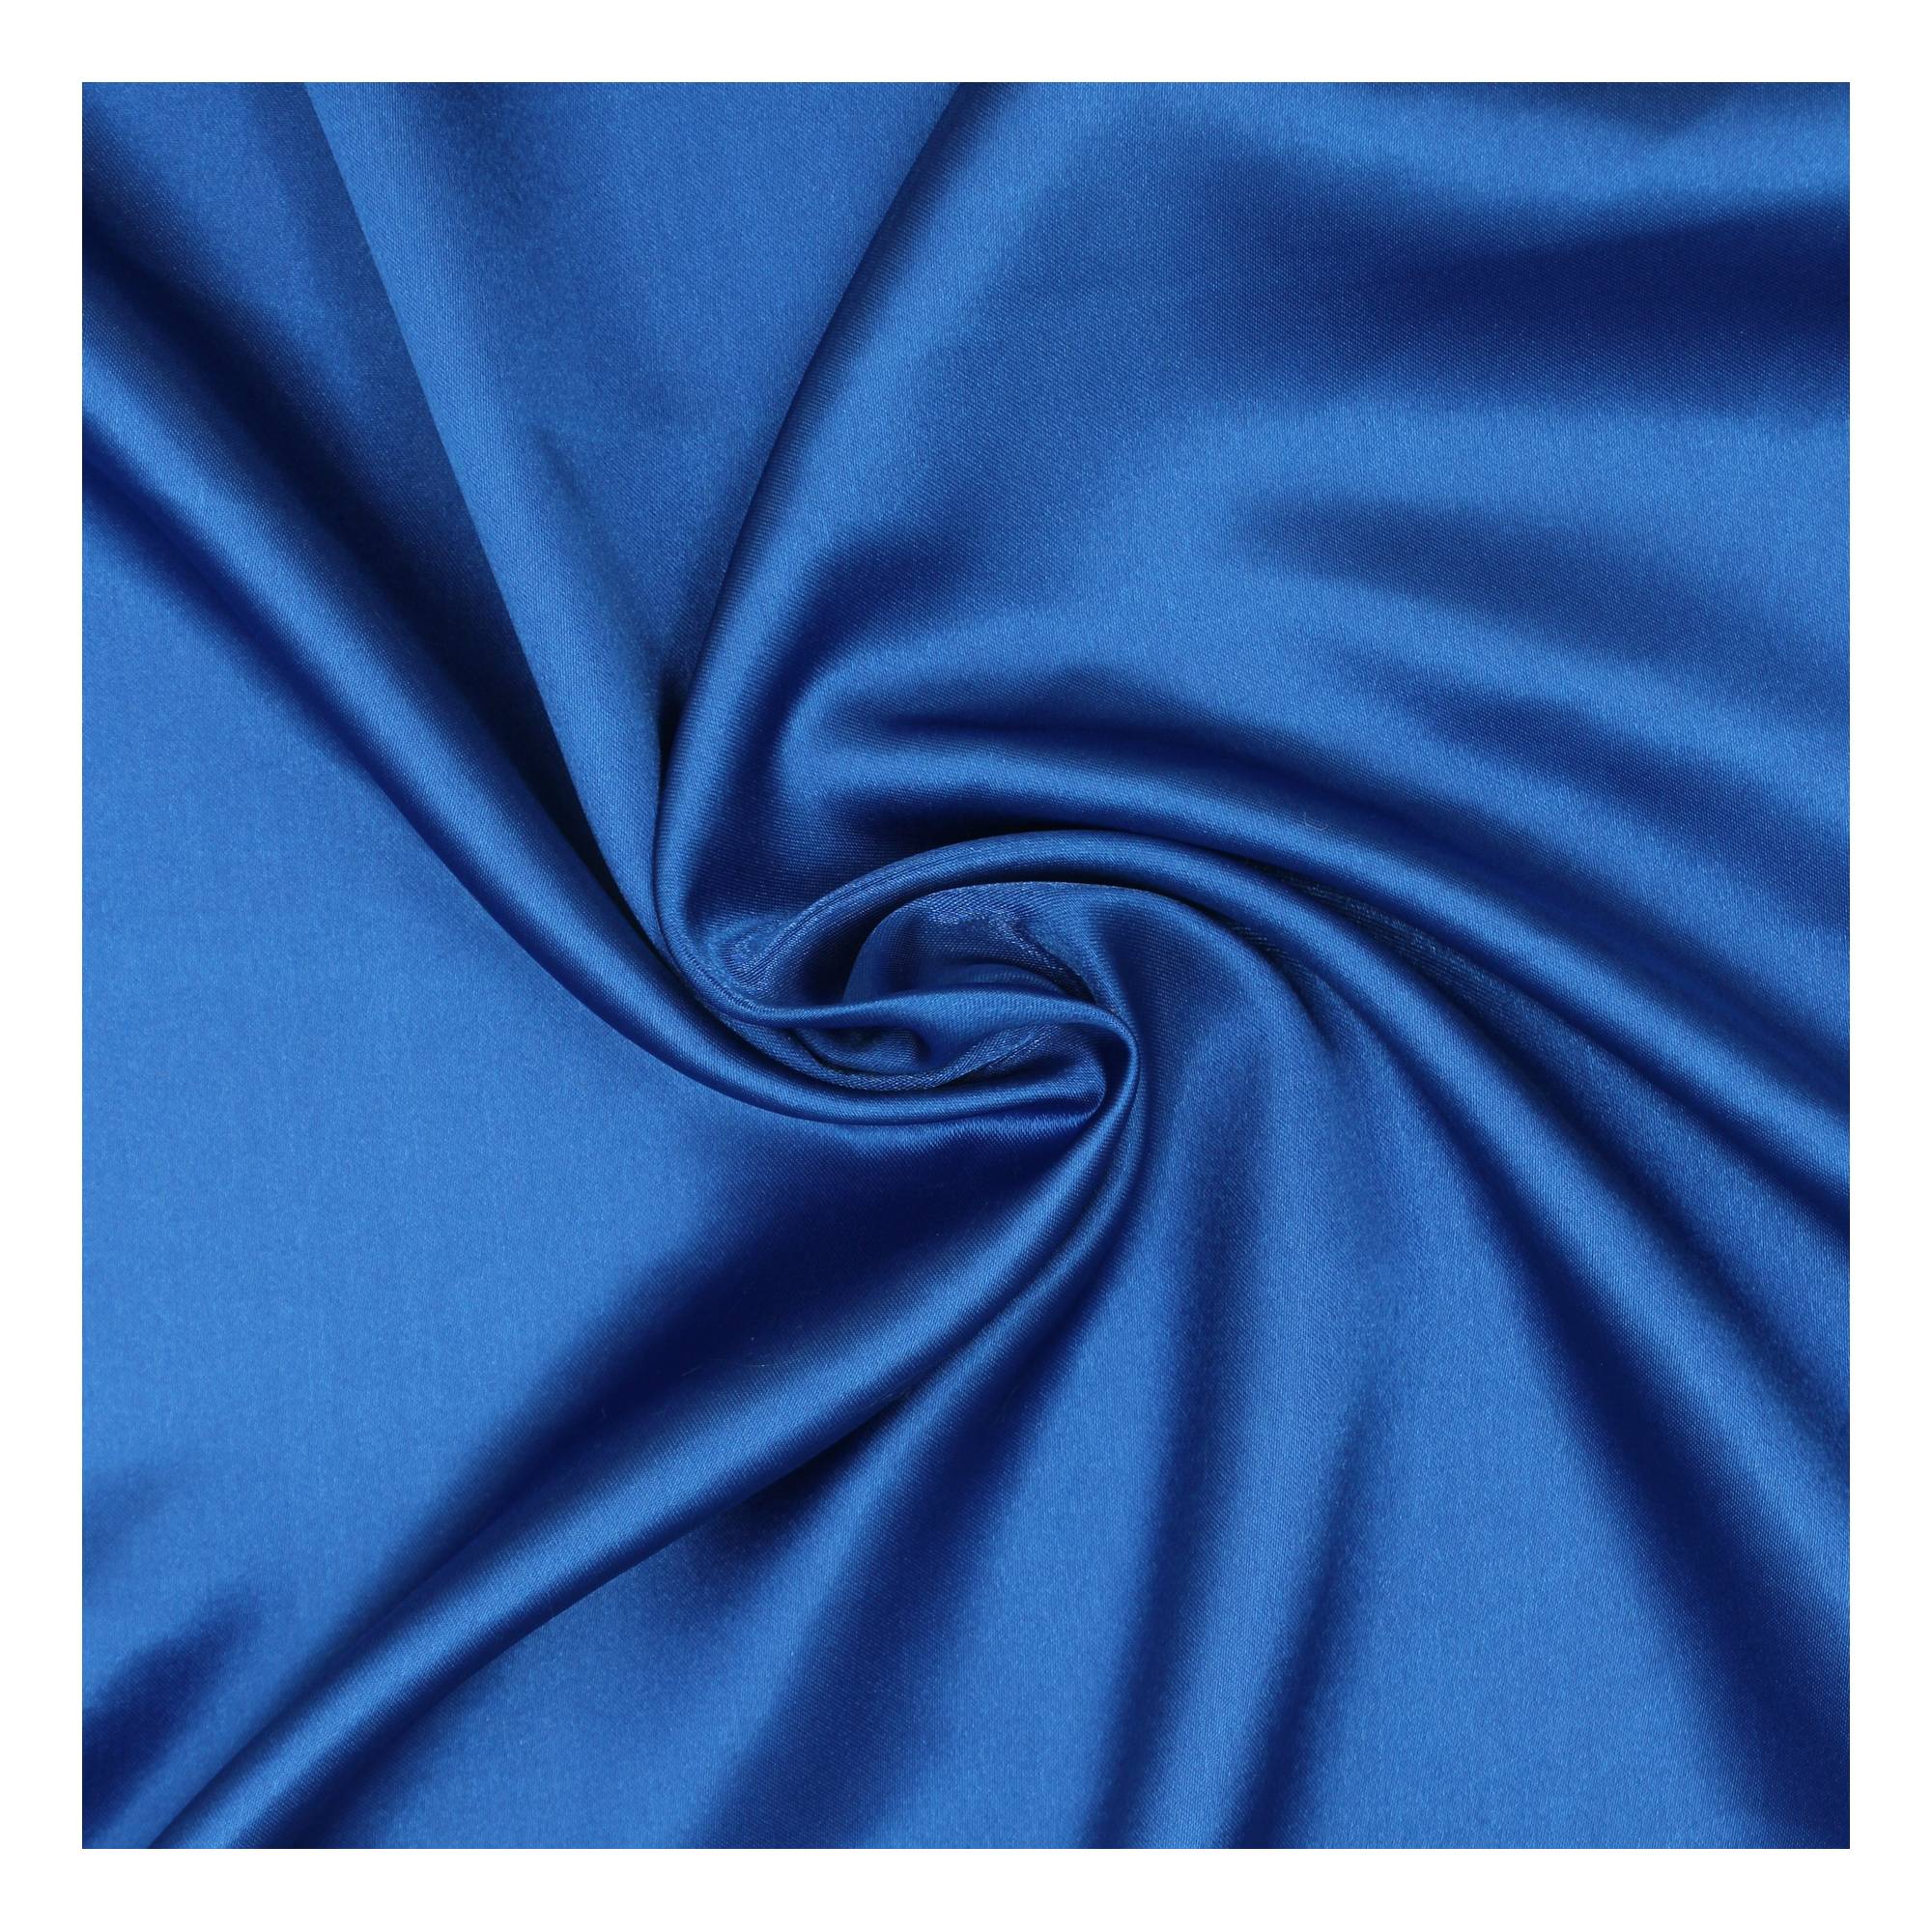 Blue Silky Satin Fabric by the Metre | Hobbycraft